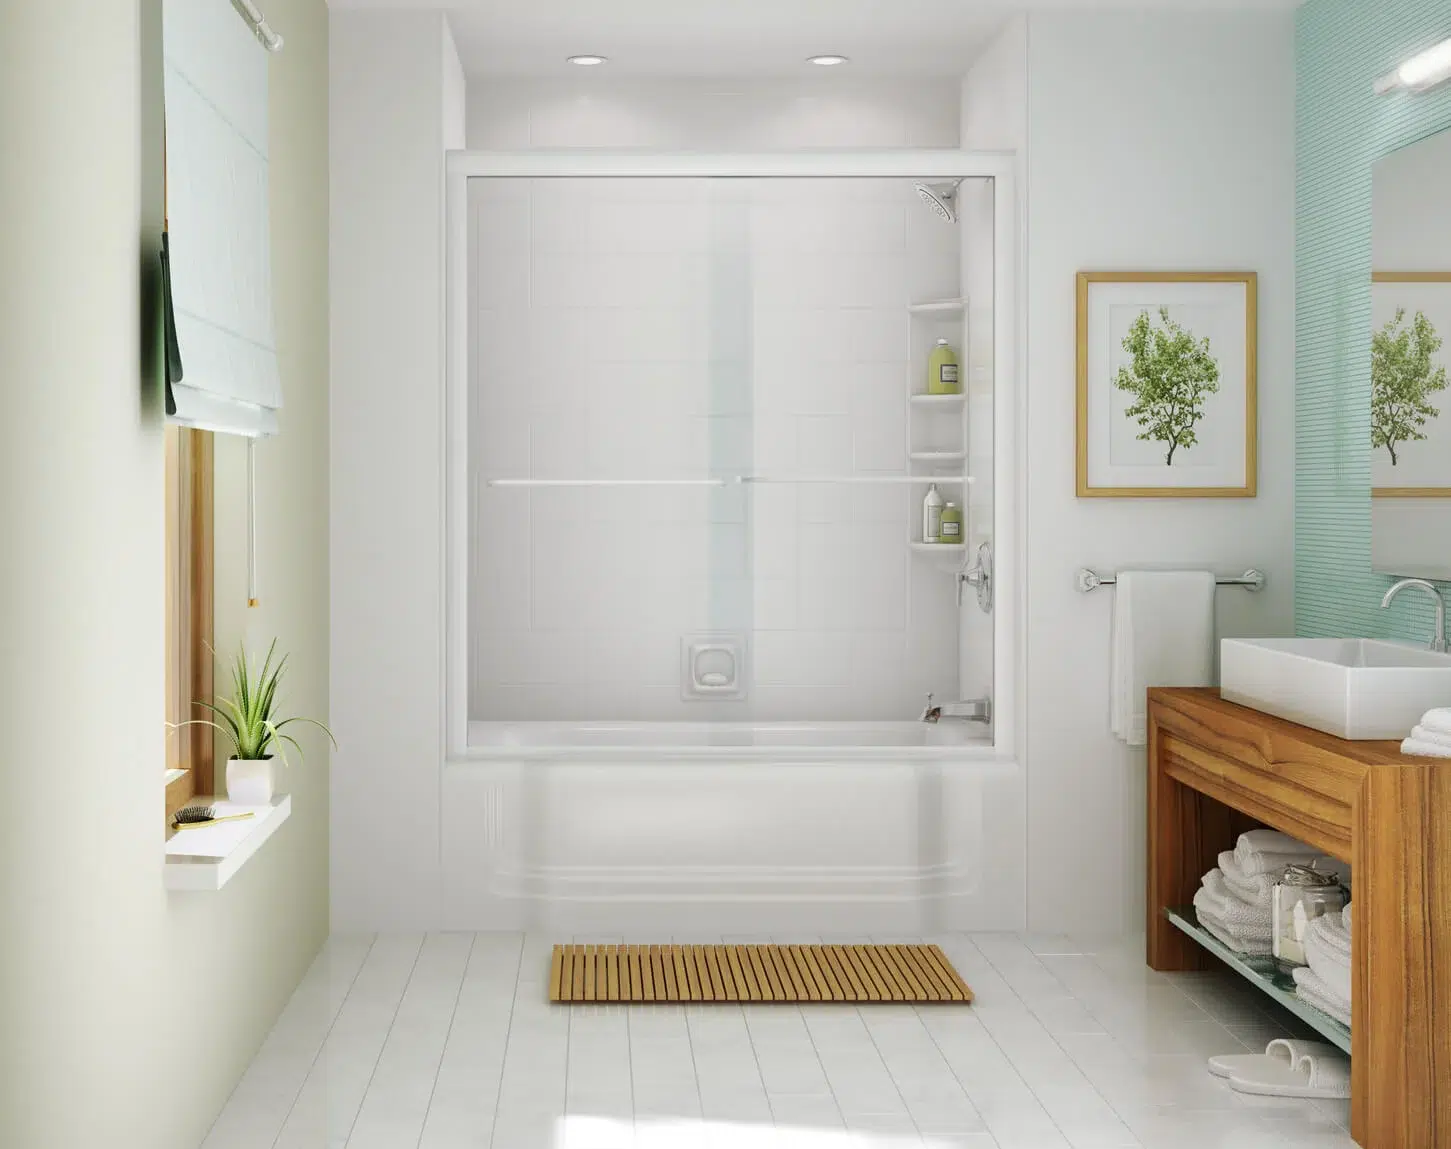 Bathroom Accent Walls: Add Style and Personality to Your Bath Space